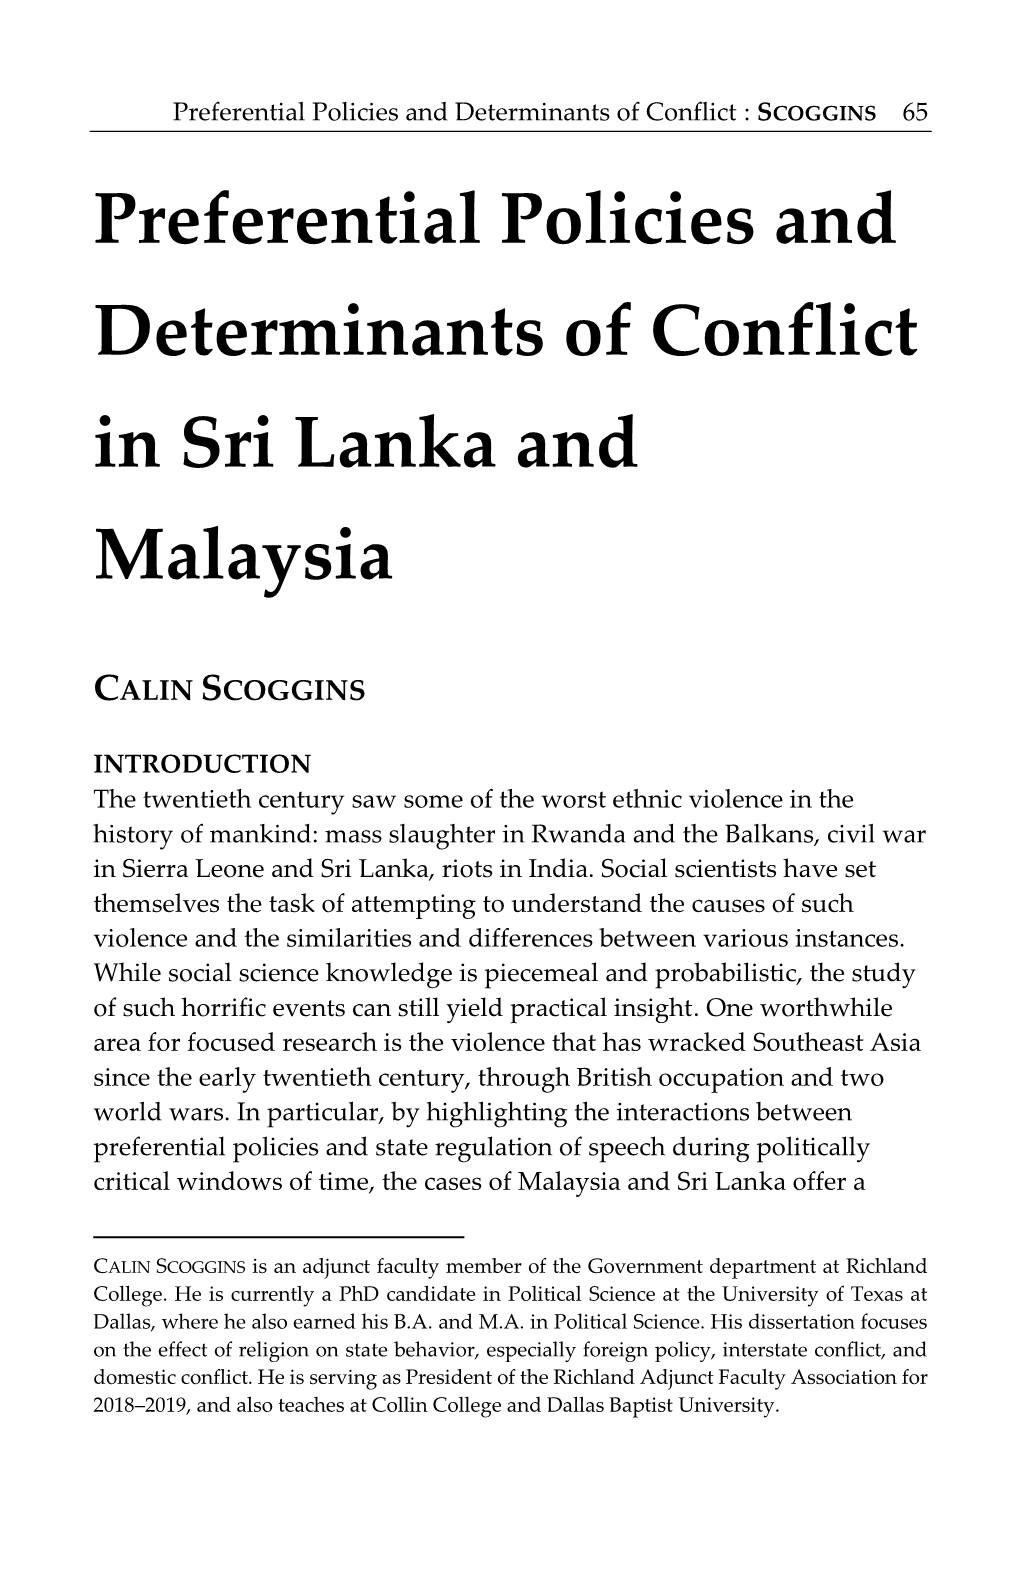 Preferential Policies and Determinants of Conflict in Sri Lanka and Malaysia